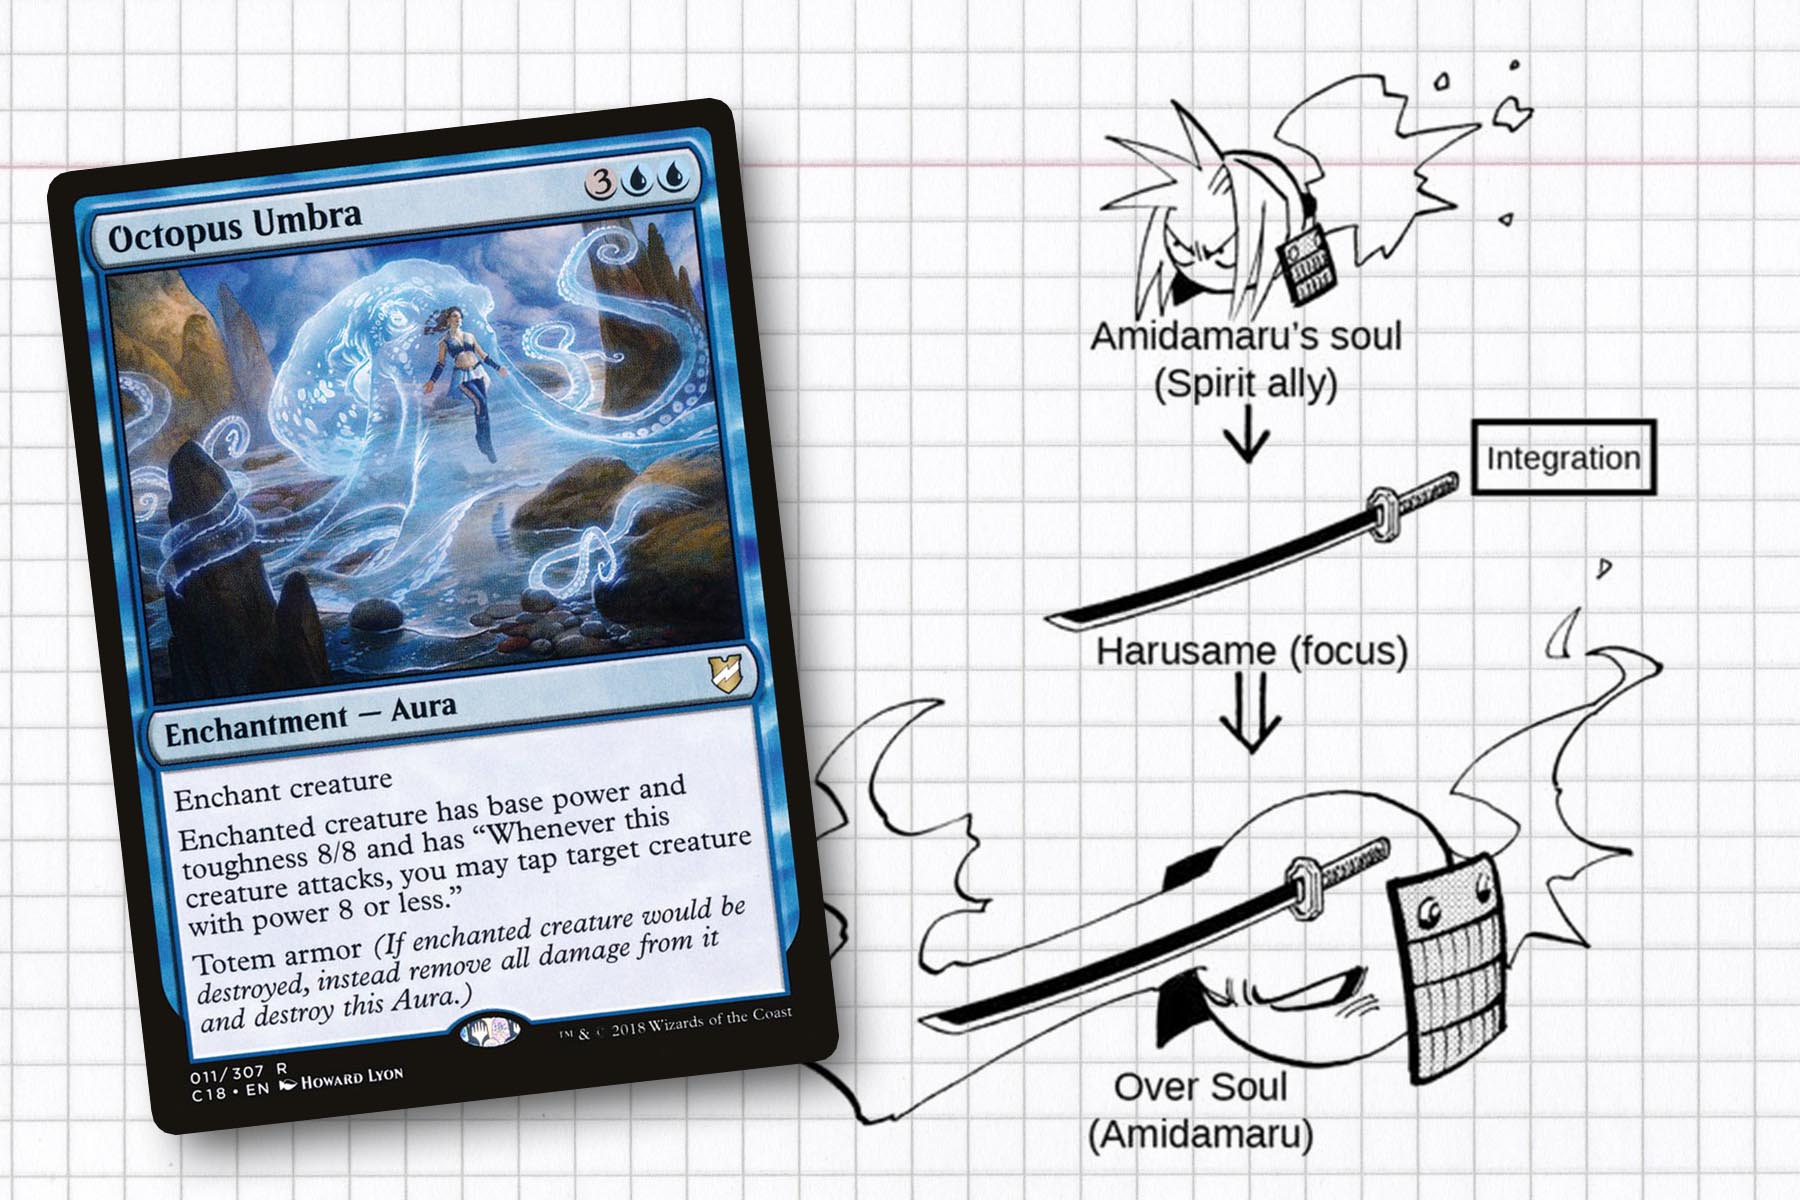 Octopus Umbra and a diagram of Shaman King’s Over Soul. Displaying how flavor meets game mechanics.